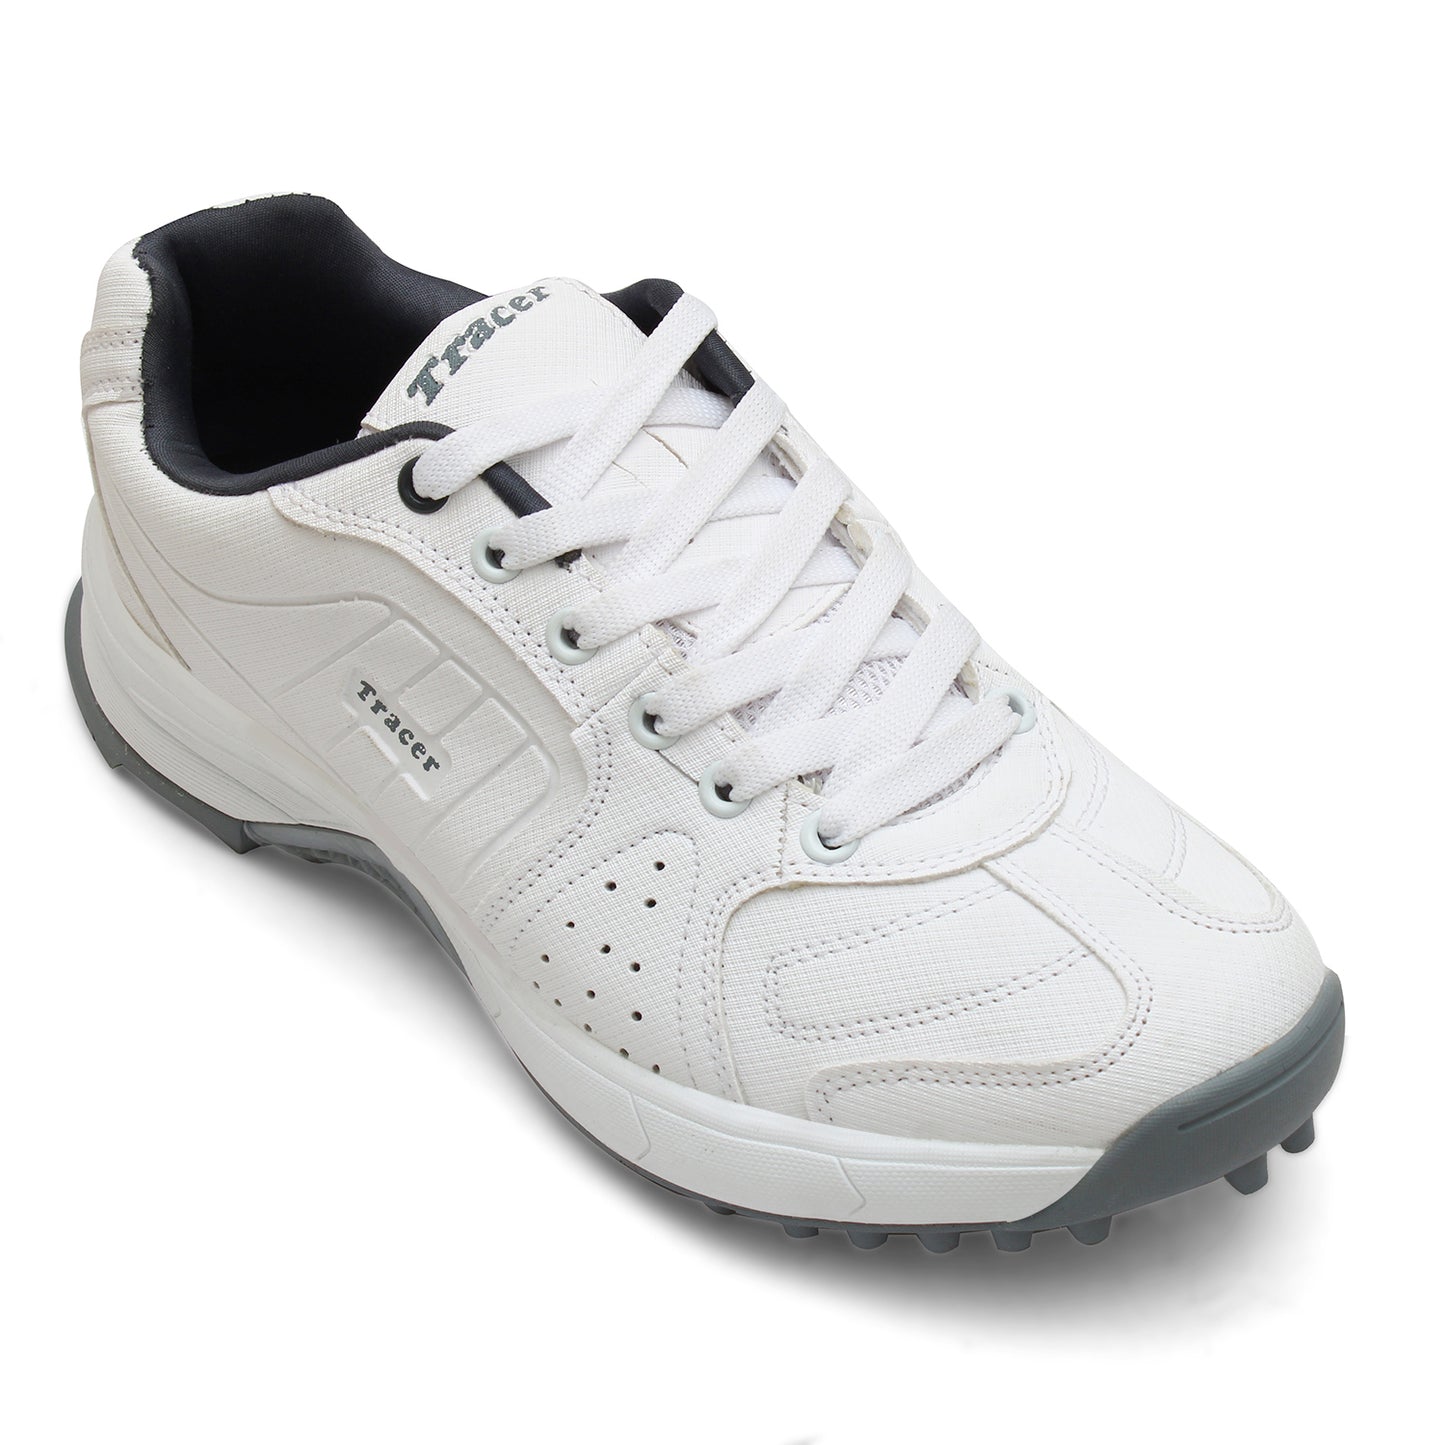 Cricket Shoes White Grey